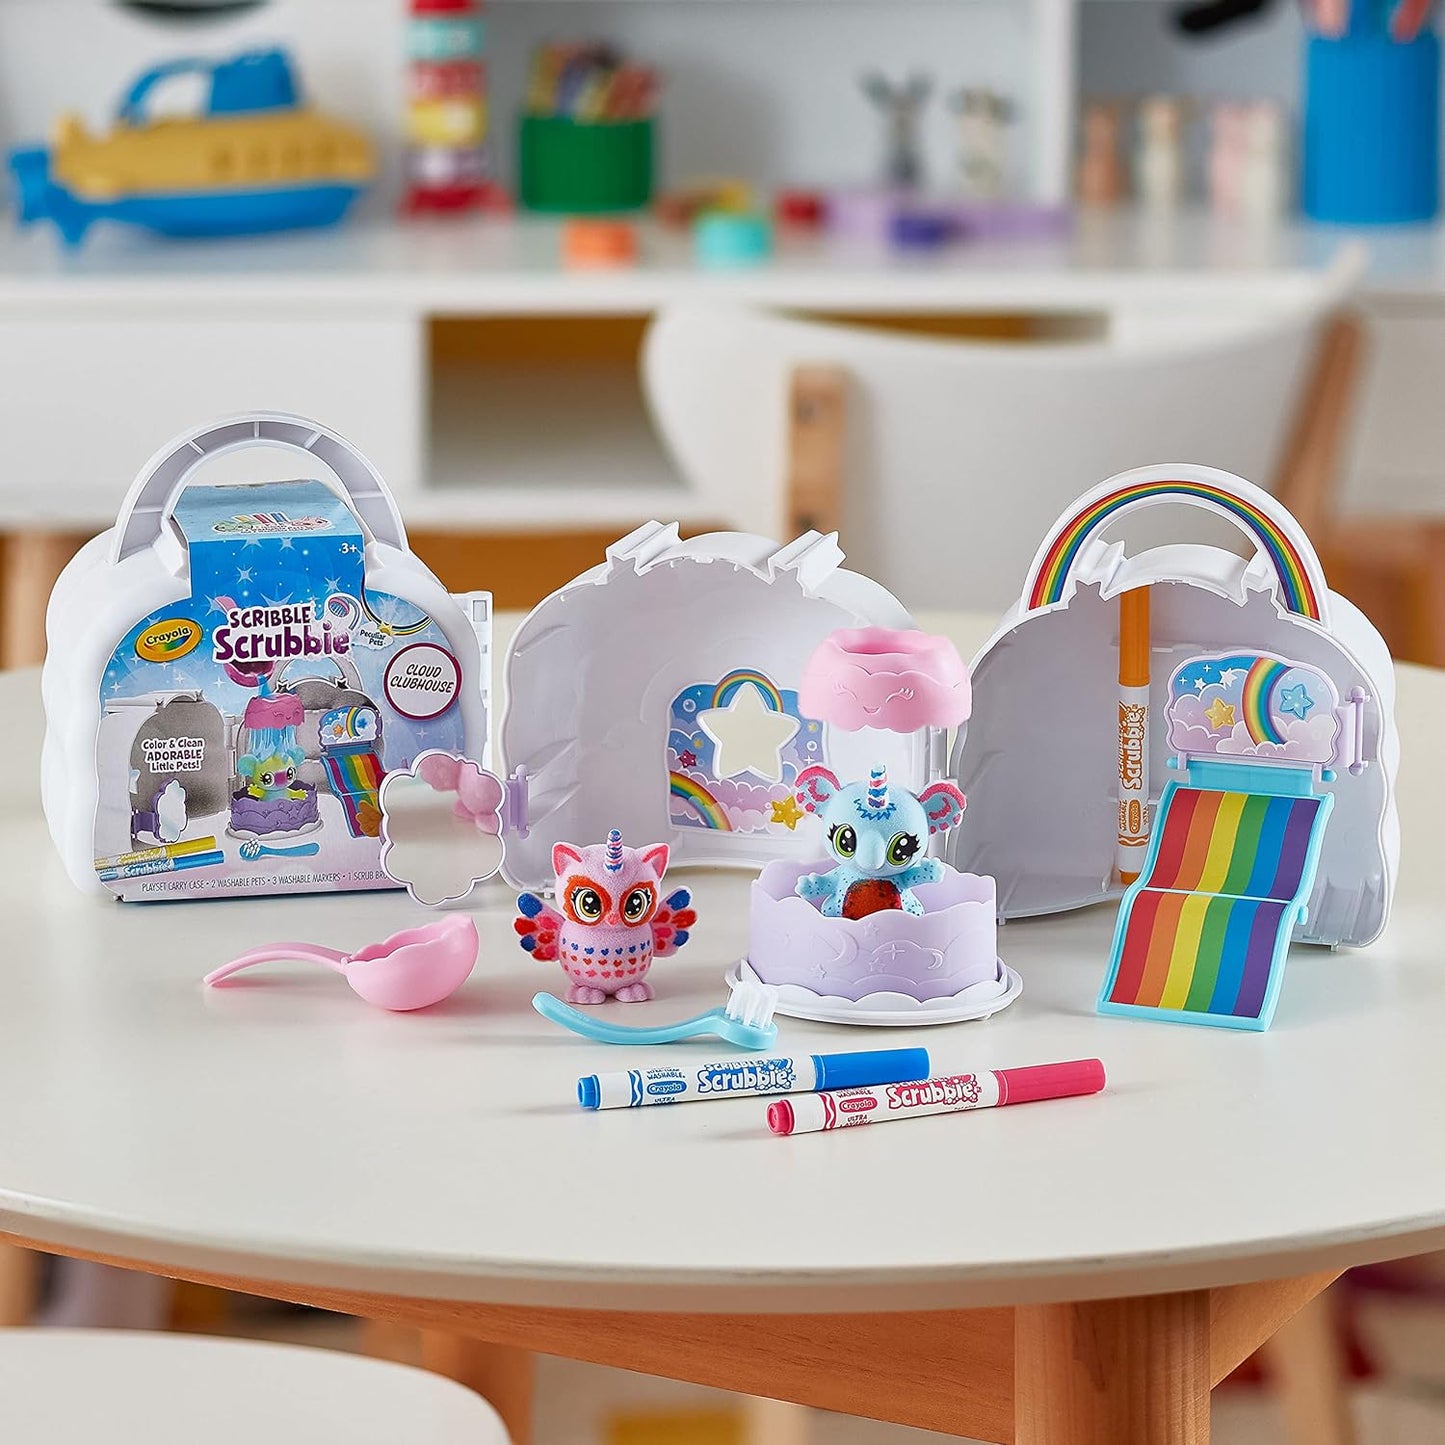 Crayola Scribble Scrubbie Pets Cloud Clubhouse Playset